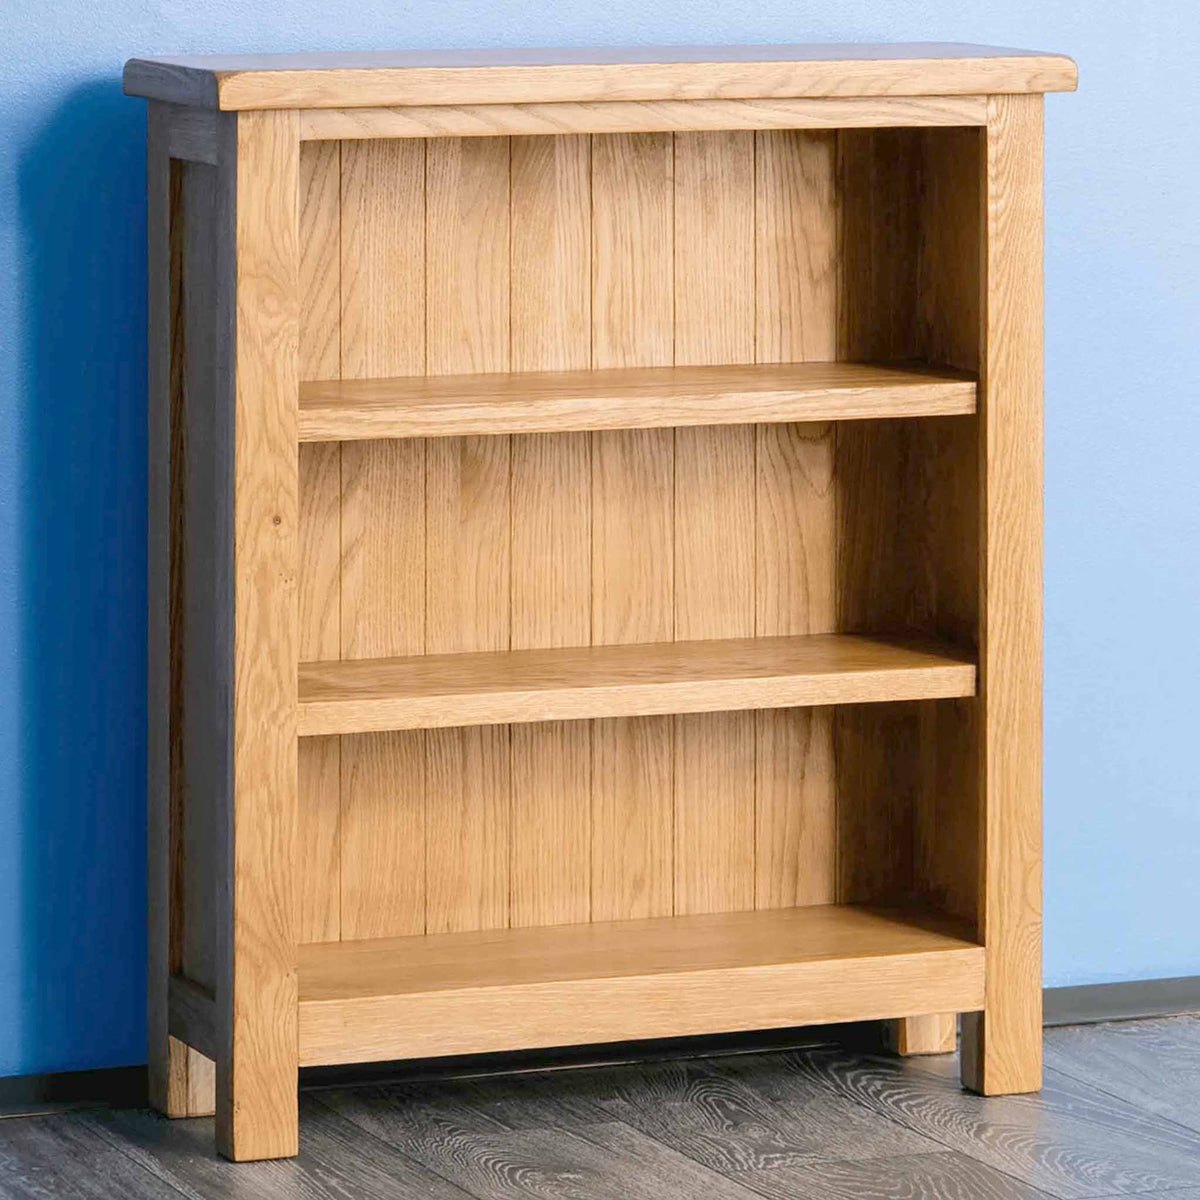 Surrey Oak Small Bookcase - Lifestyle side view